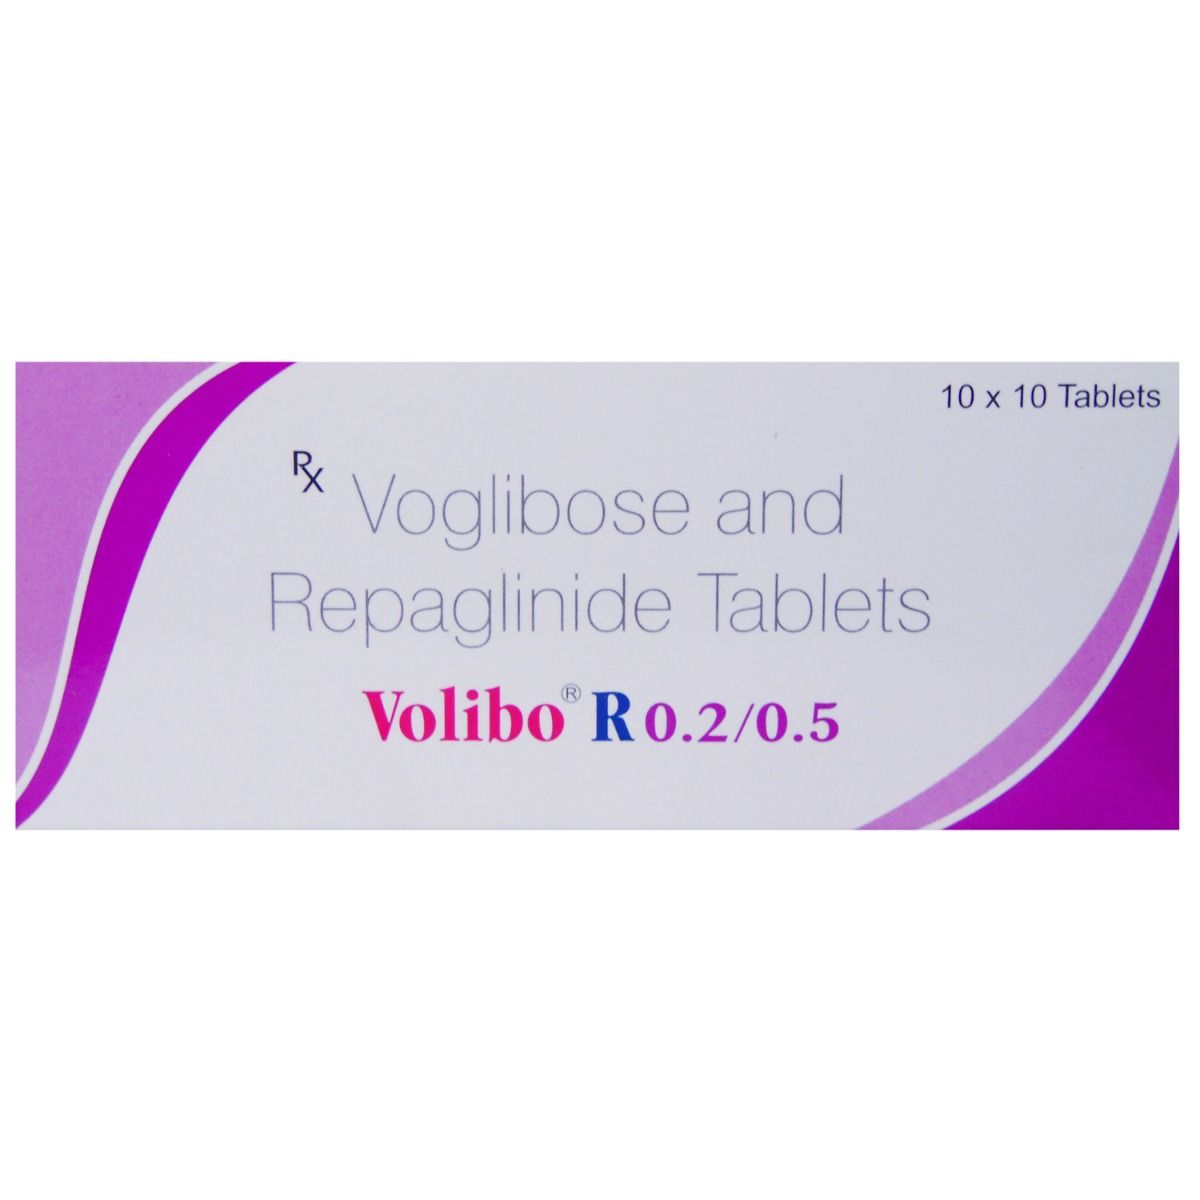 Volibo R 0.2/0.5 Tablet 10's Price, Uses, Side Effects ...